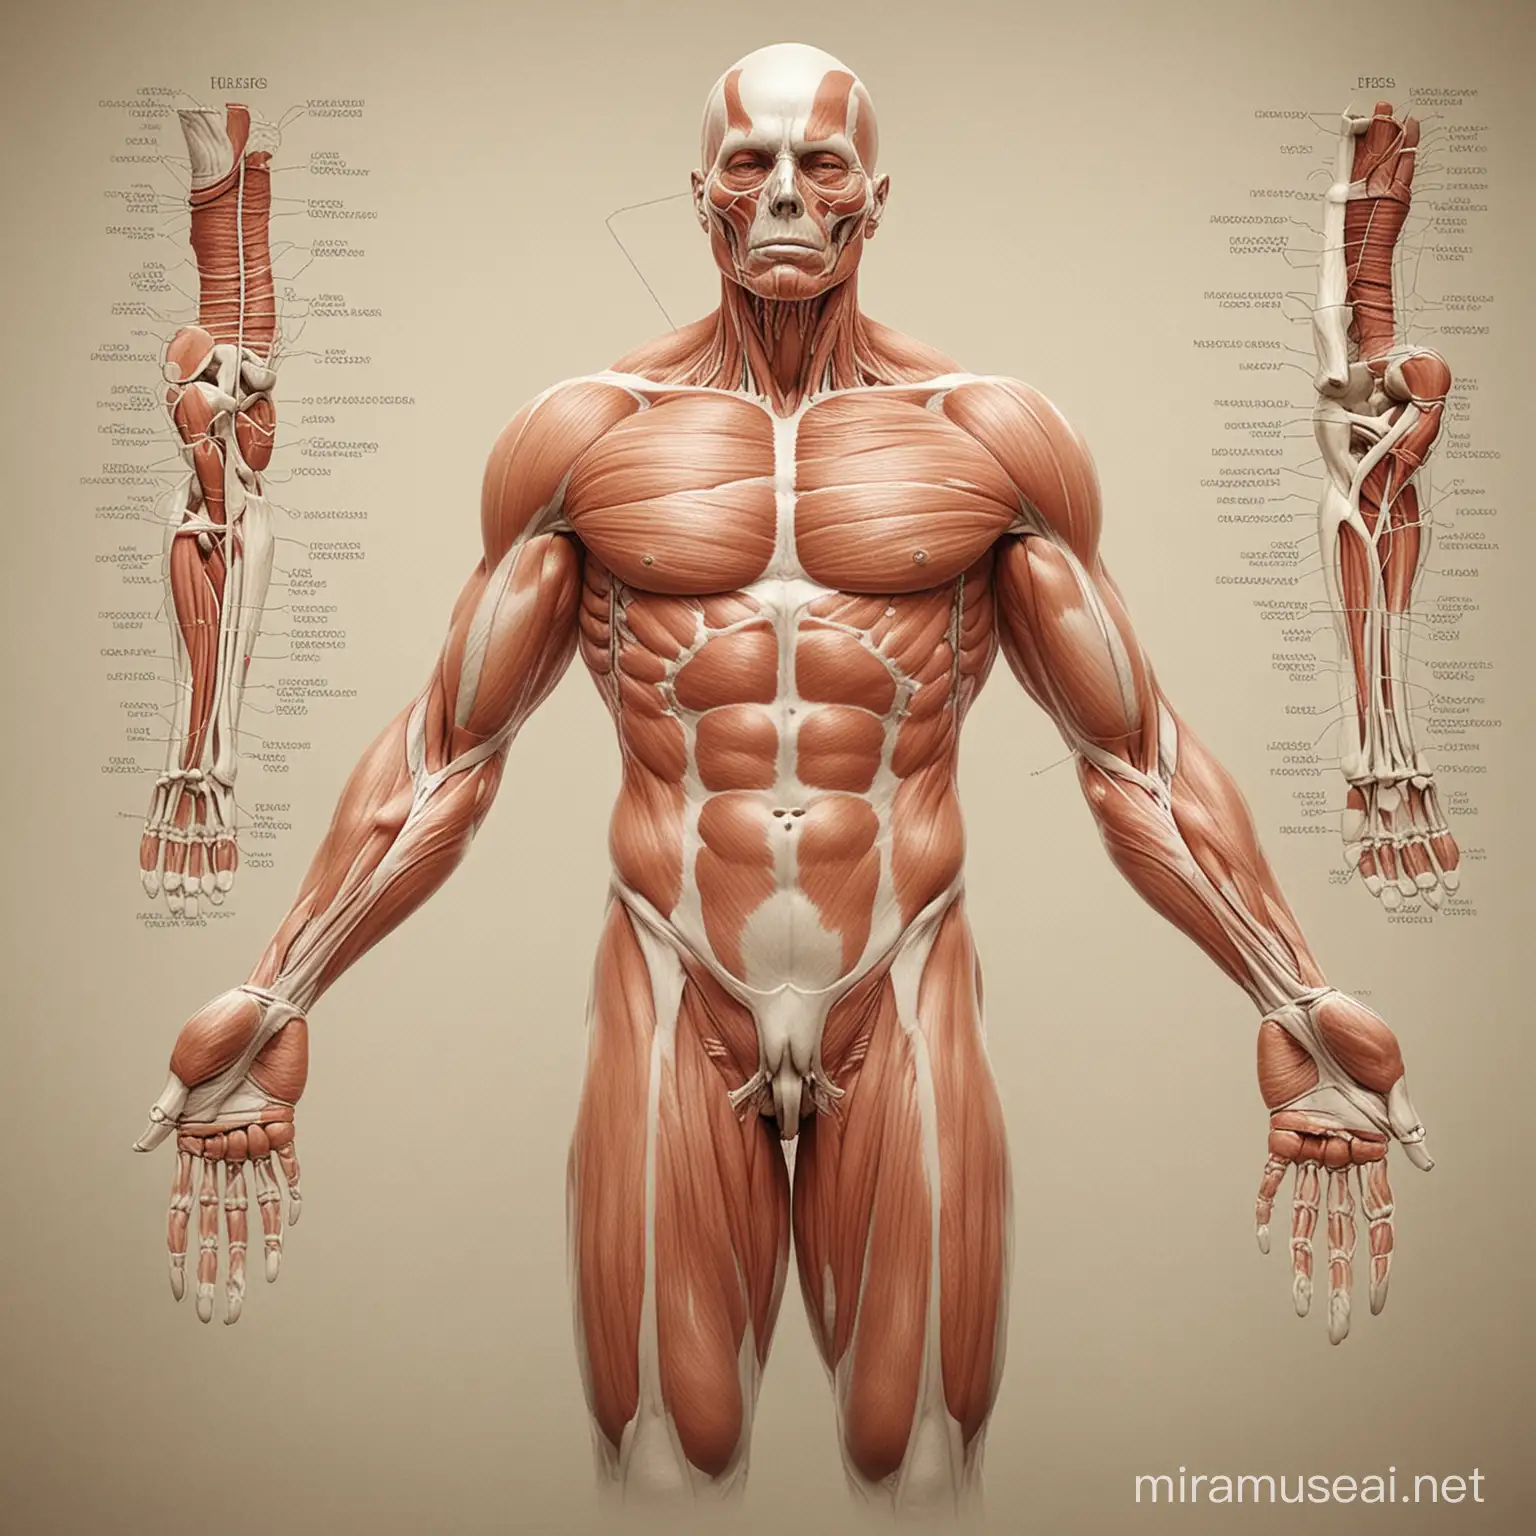 Detailed Illustration of Human Muscles and Tissues